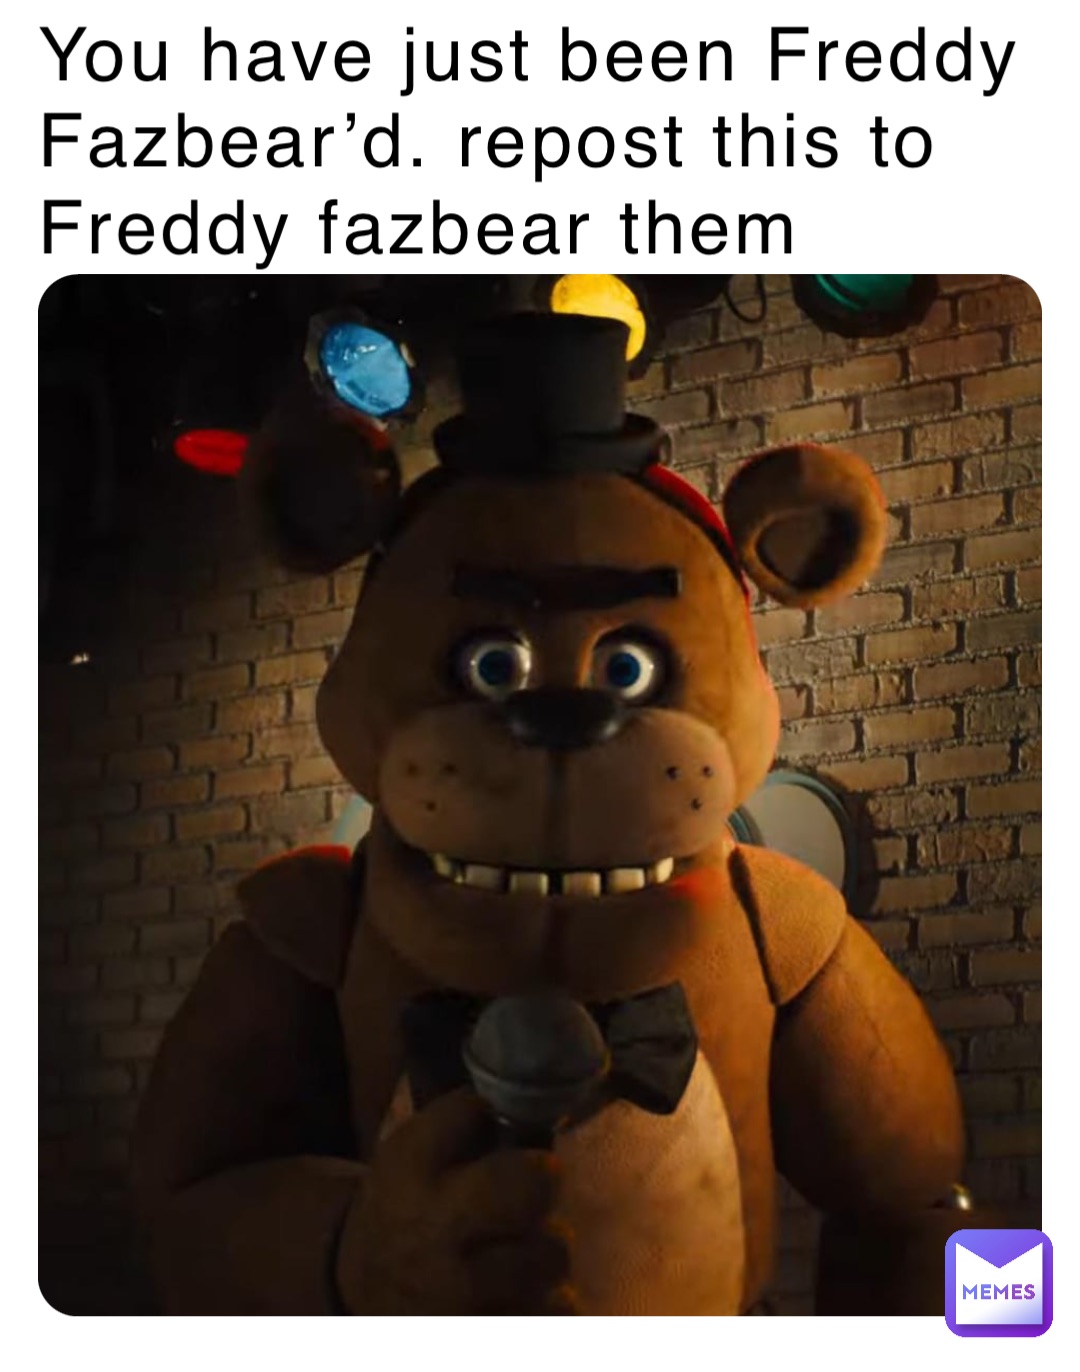 You have just been Freddy Fazbear’d. repost this to Freddy fazbear them